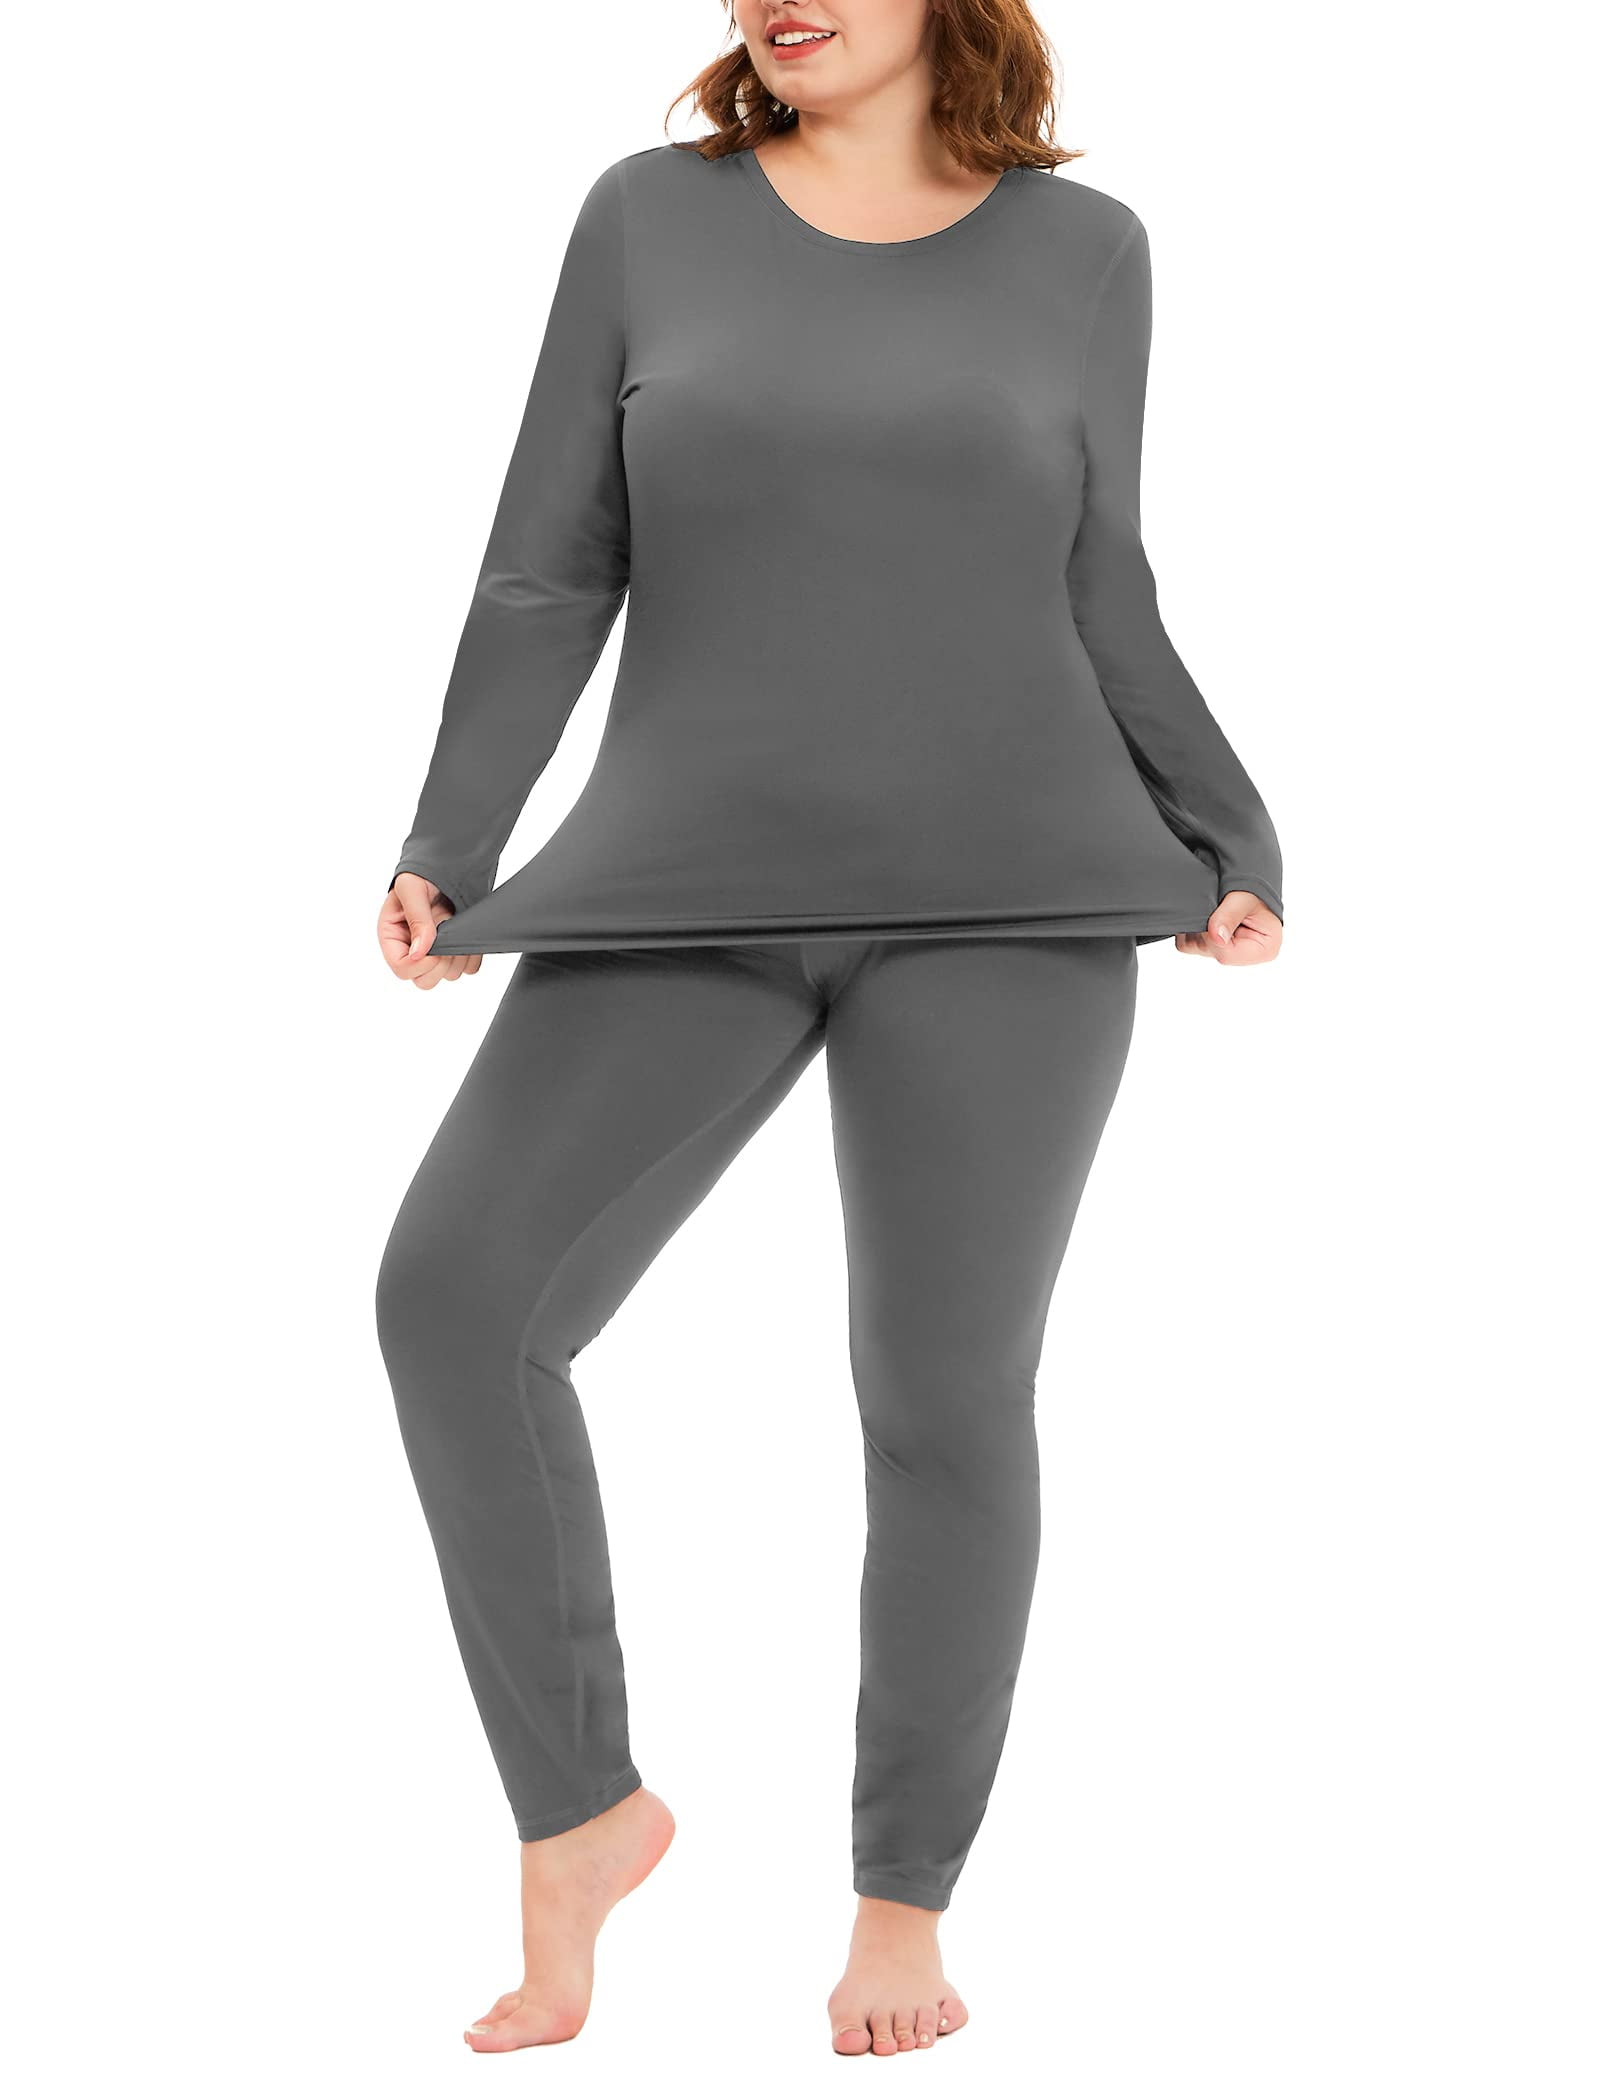 TIYOMI Plus Size 5X Dark Grey Thermal Underwear Suits For Women Long Johns  Fleece Lined Base Layer Crewneck Top and Bottom Sets Fall Winter Pajama